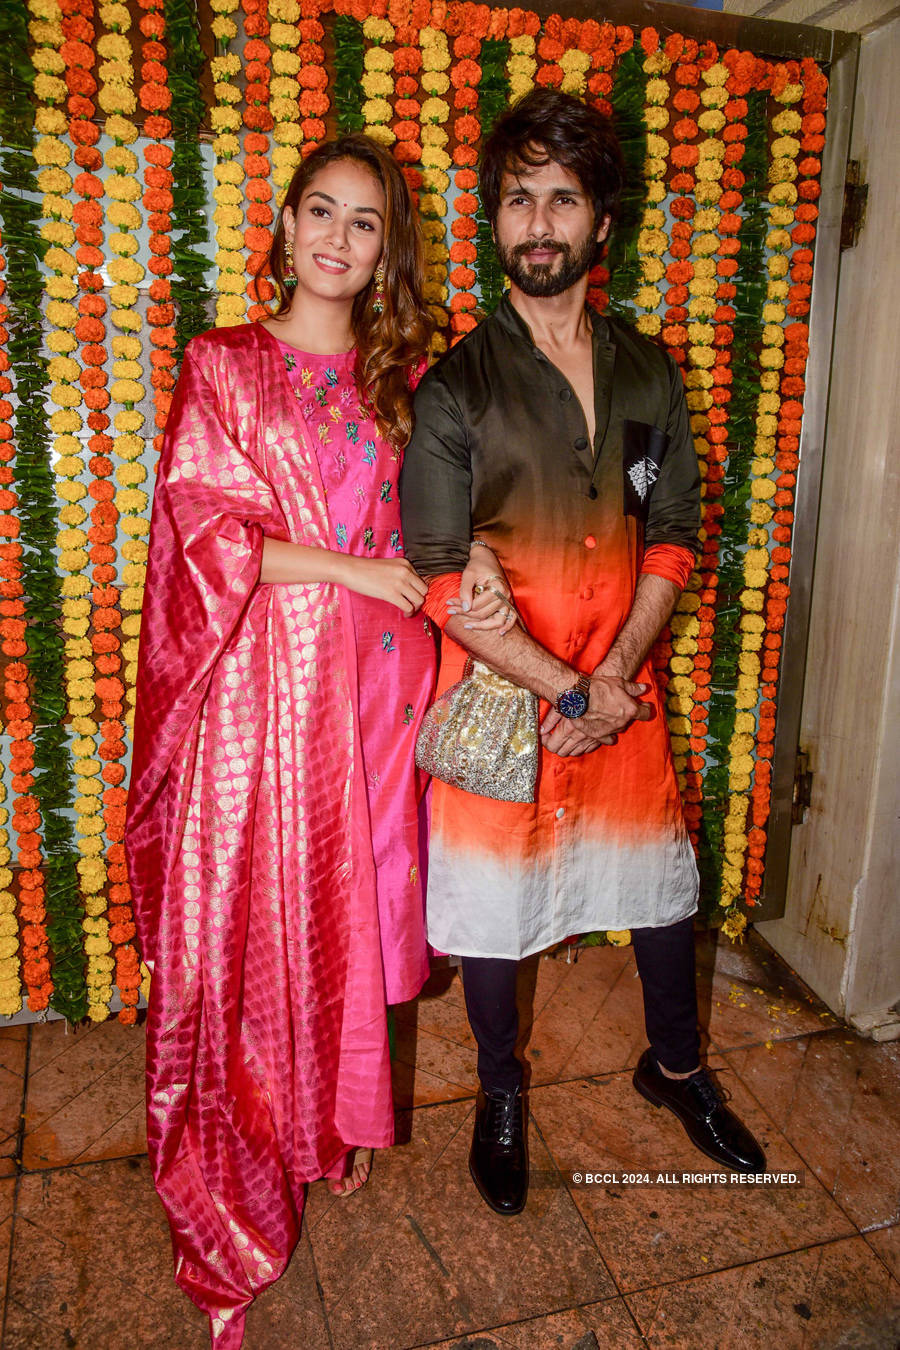 Mesmerising pictures from Ekta Kapoor's star-studded Diwali party